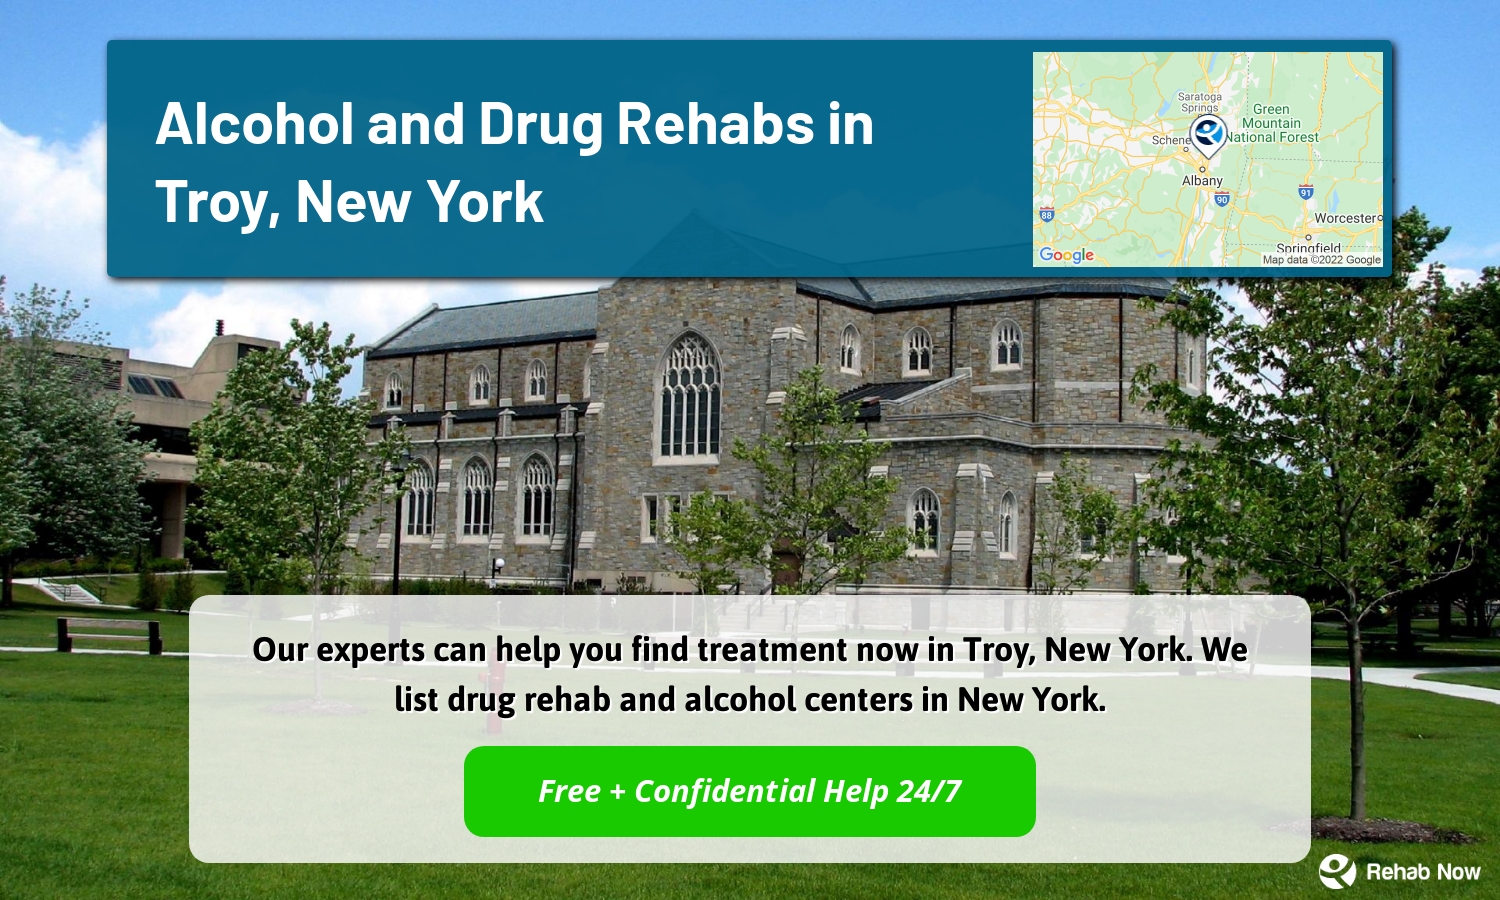 Our experts can help you find treatment now in Troy, New York. We list drug rehab and alcohol centers in New York.